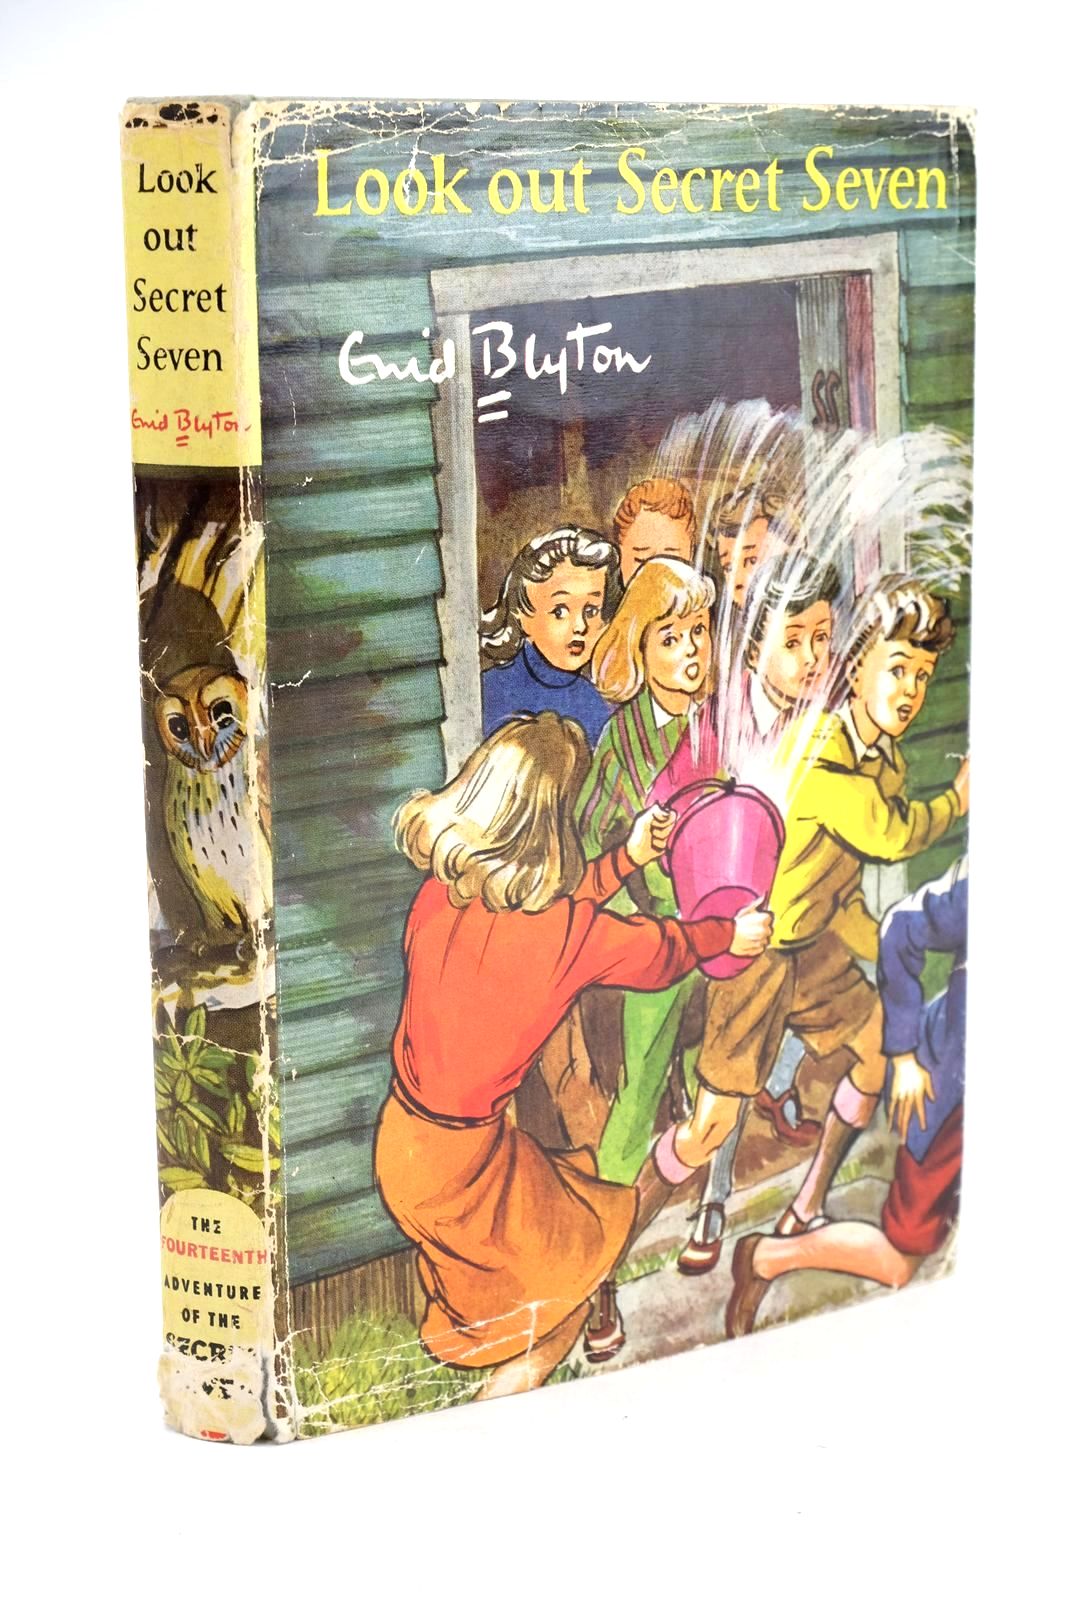 Photo of LOOK OUT SECRET SEVEN written by Blyton, Enid illustrated by Sharrocks, Burgess published by Brockhampton Press Ltd. (STOCK CODE: 1324551)  for sale by Stella & Rose's Books